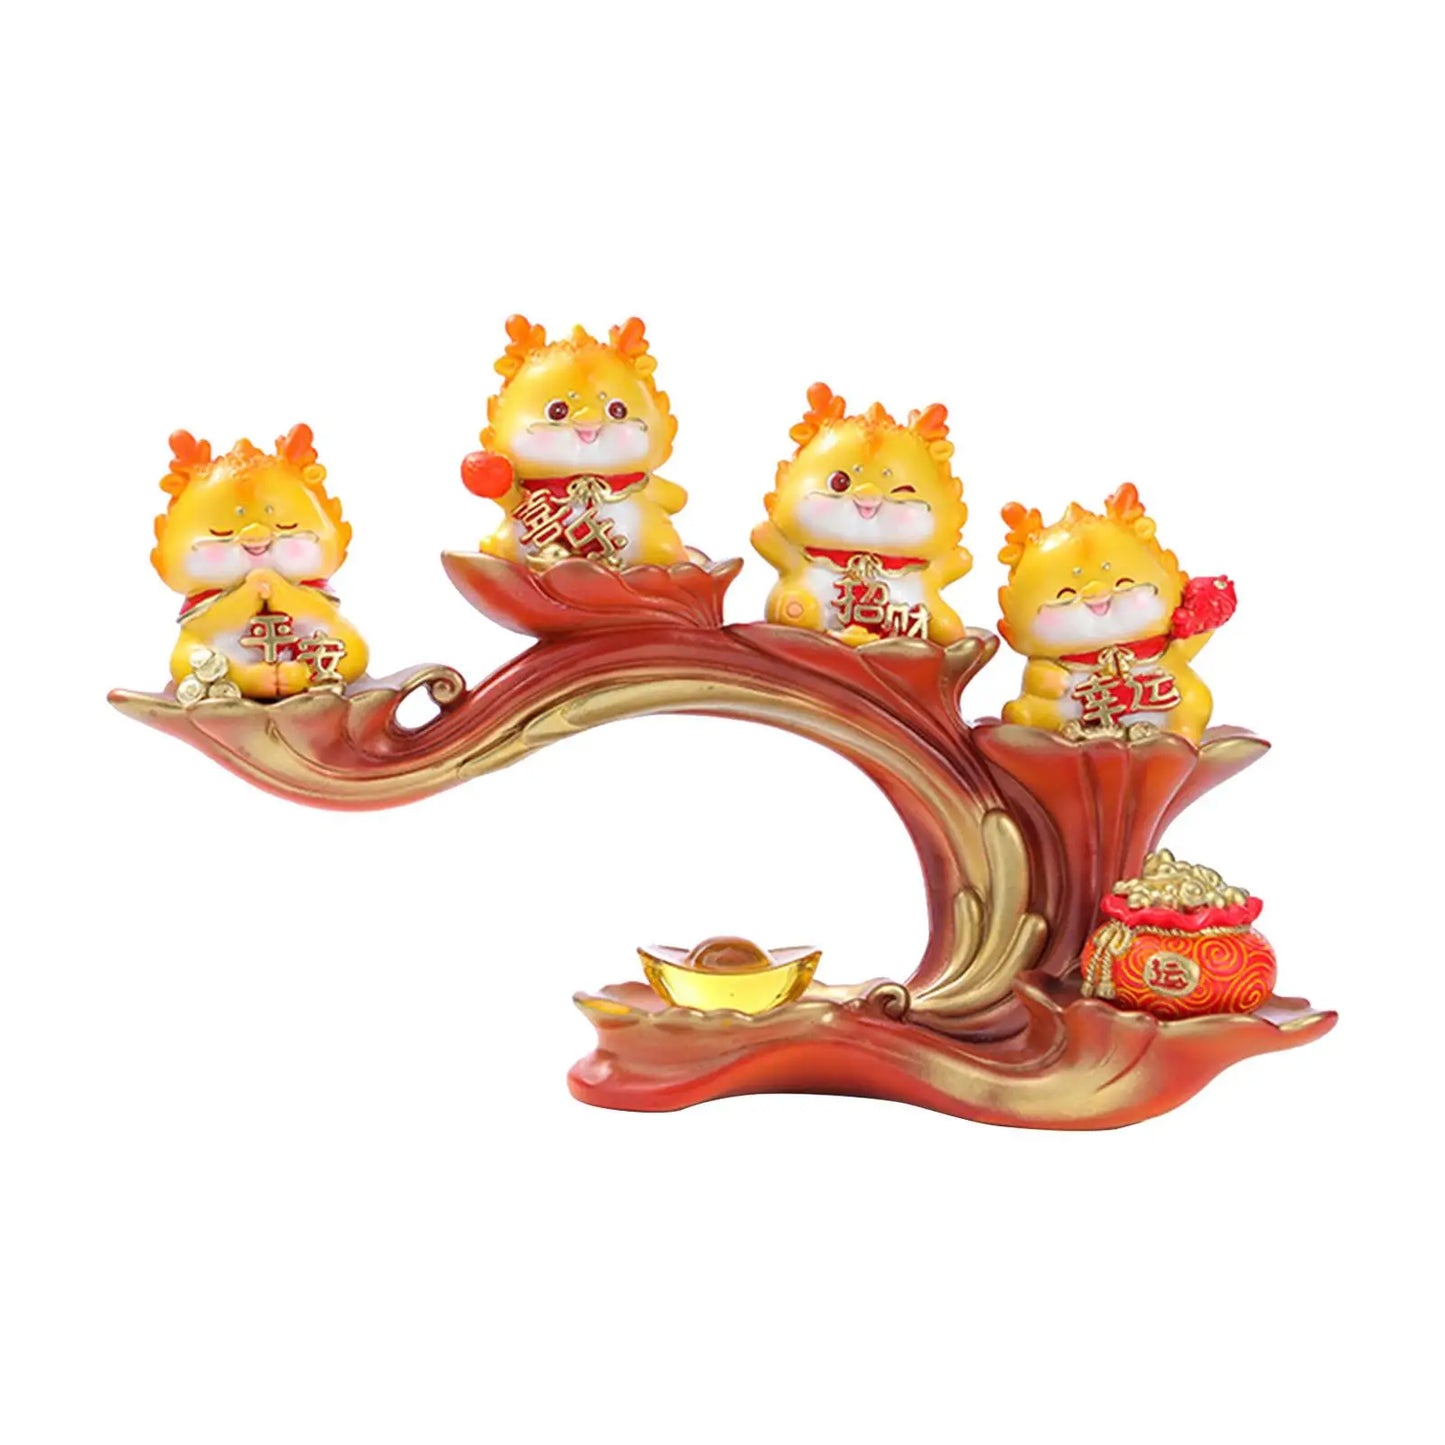 2024 Dragon Year Mascot Figurines A Complete Set Of Chinese Zodiac Dragon Ornaments Festive Dragons Lucky Racks Sculpture